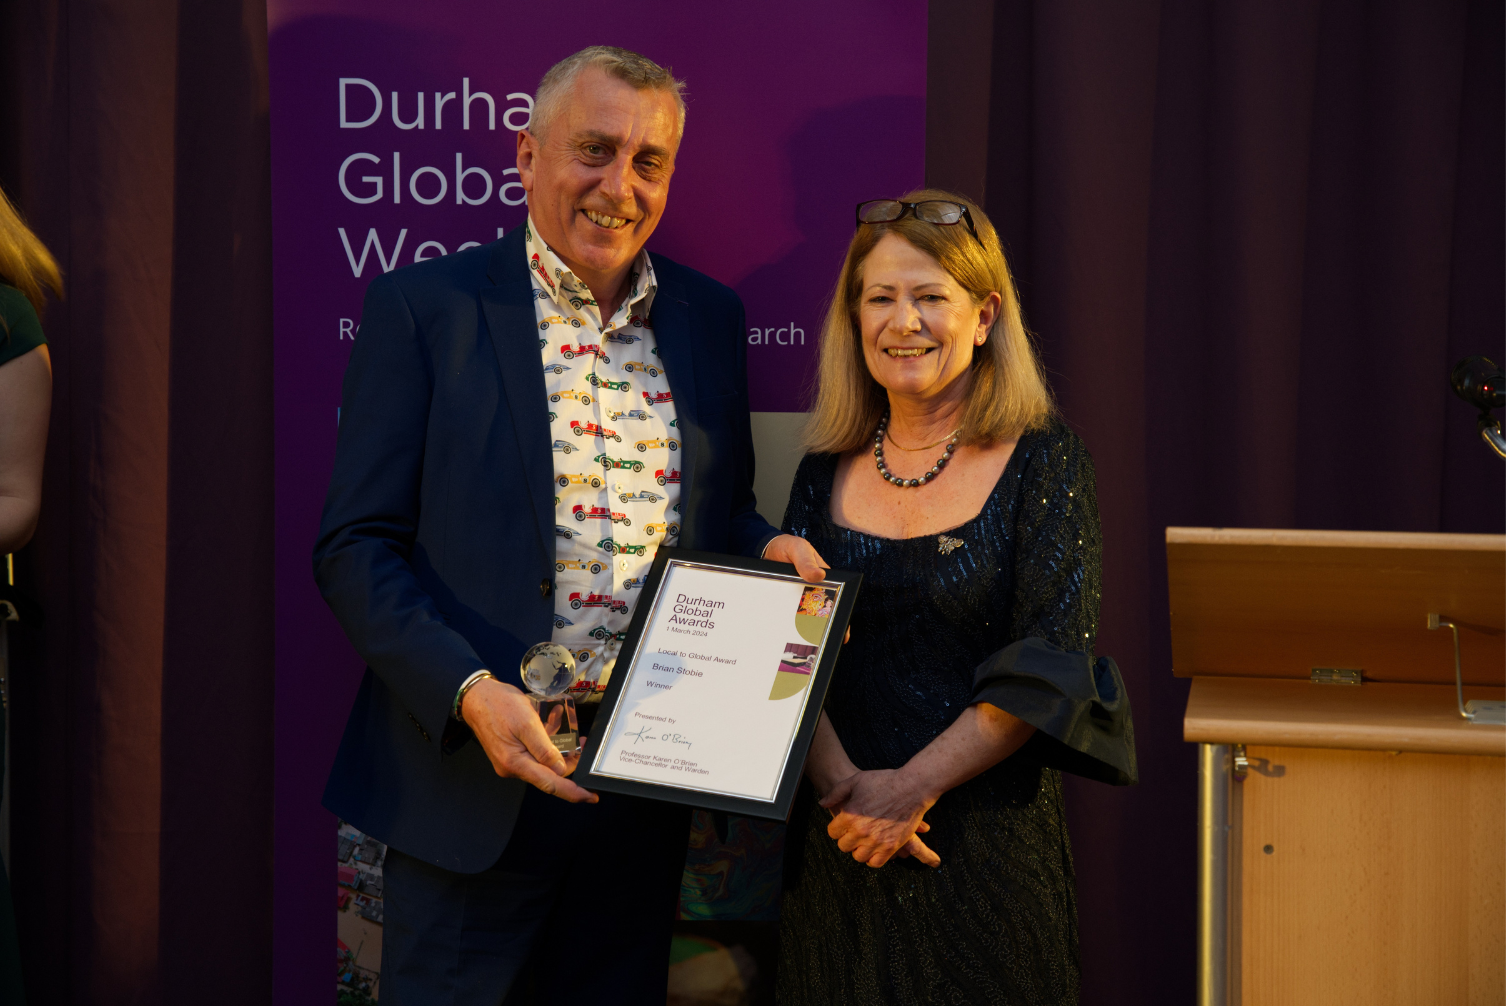 Brian Stobie receiving the Local to Global Award